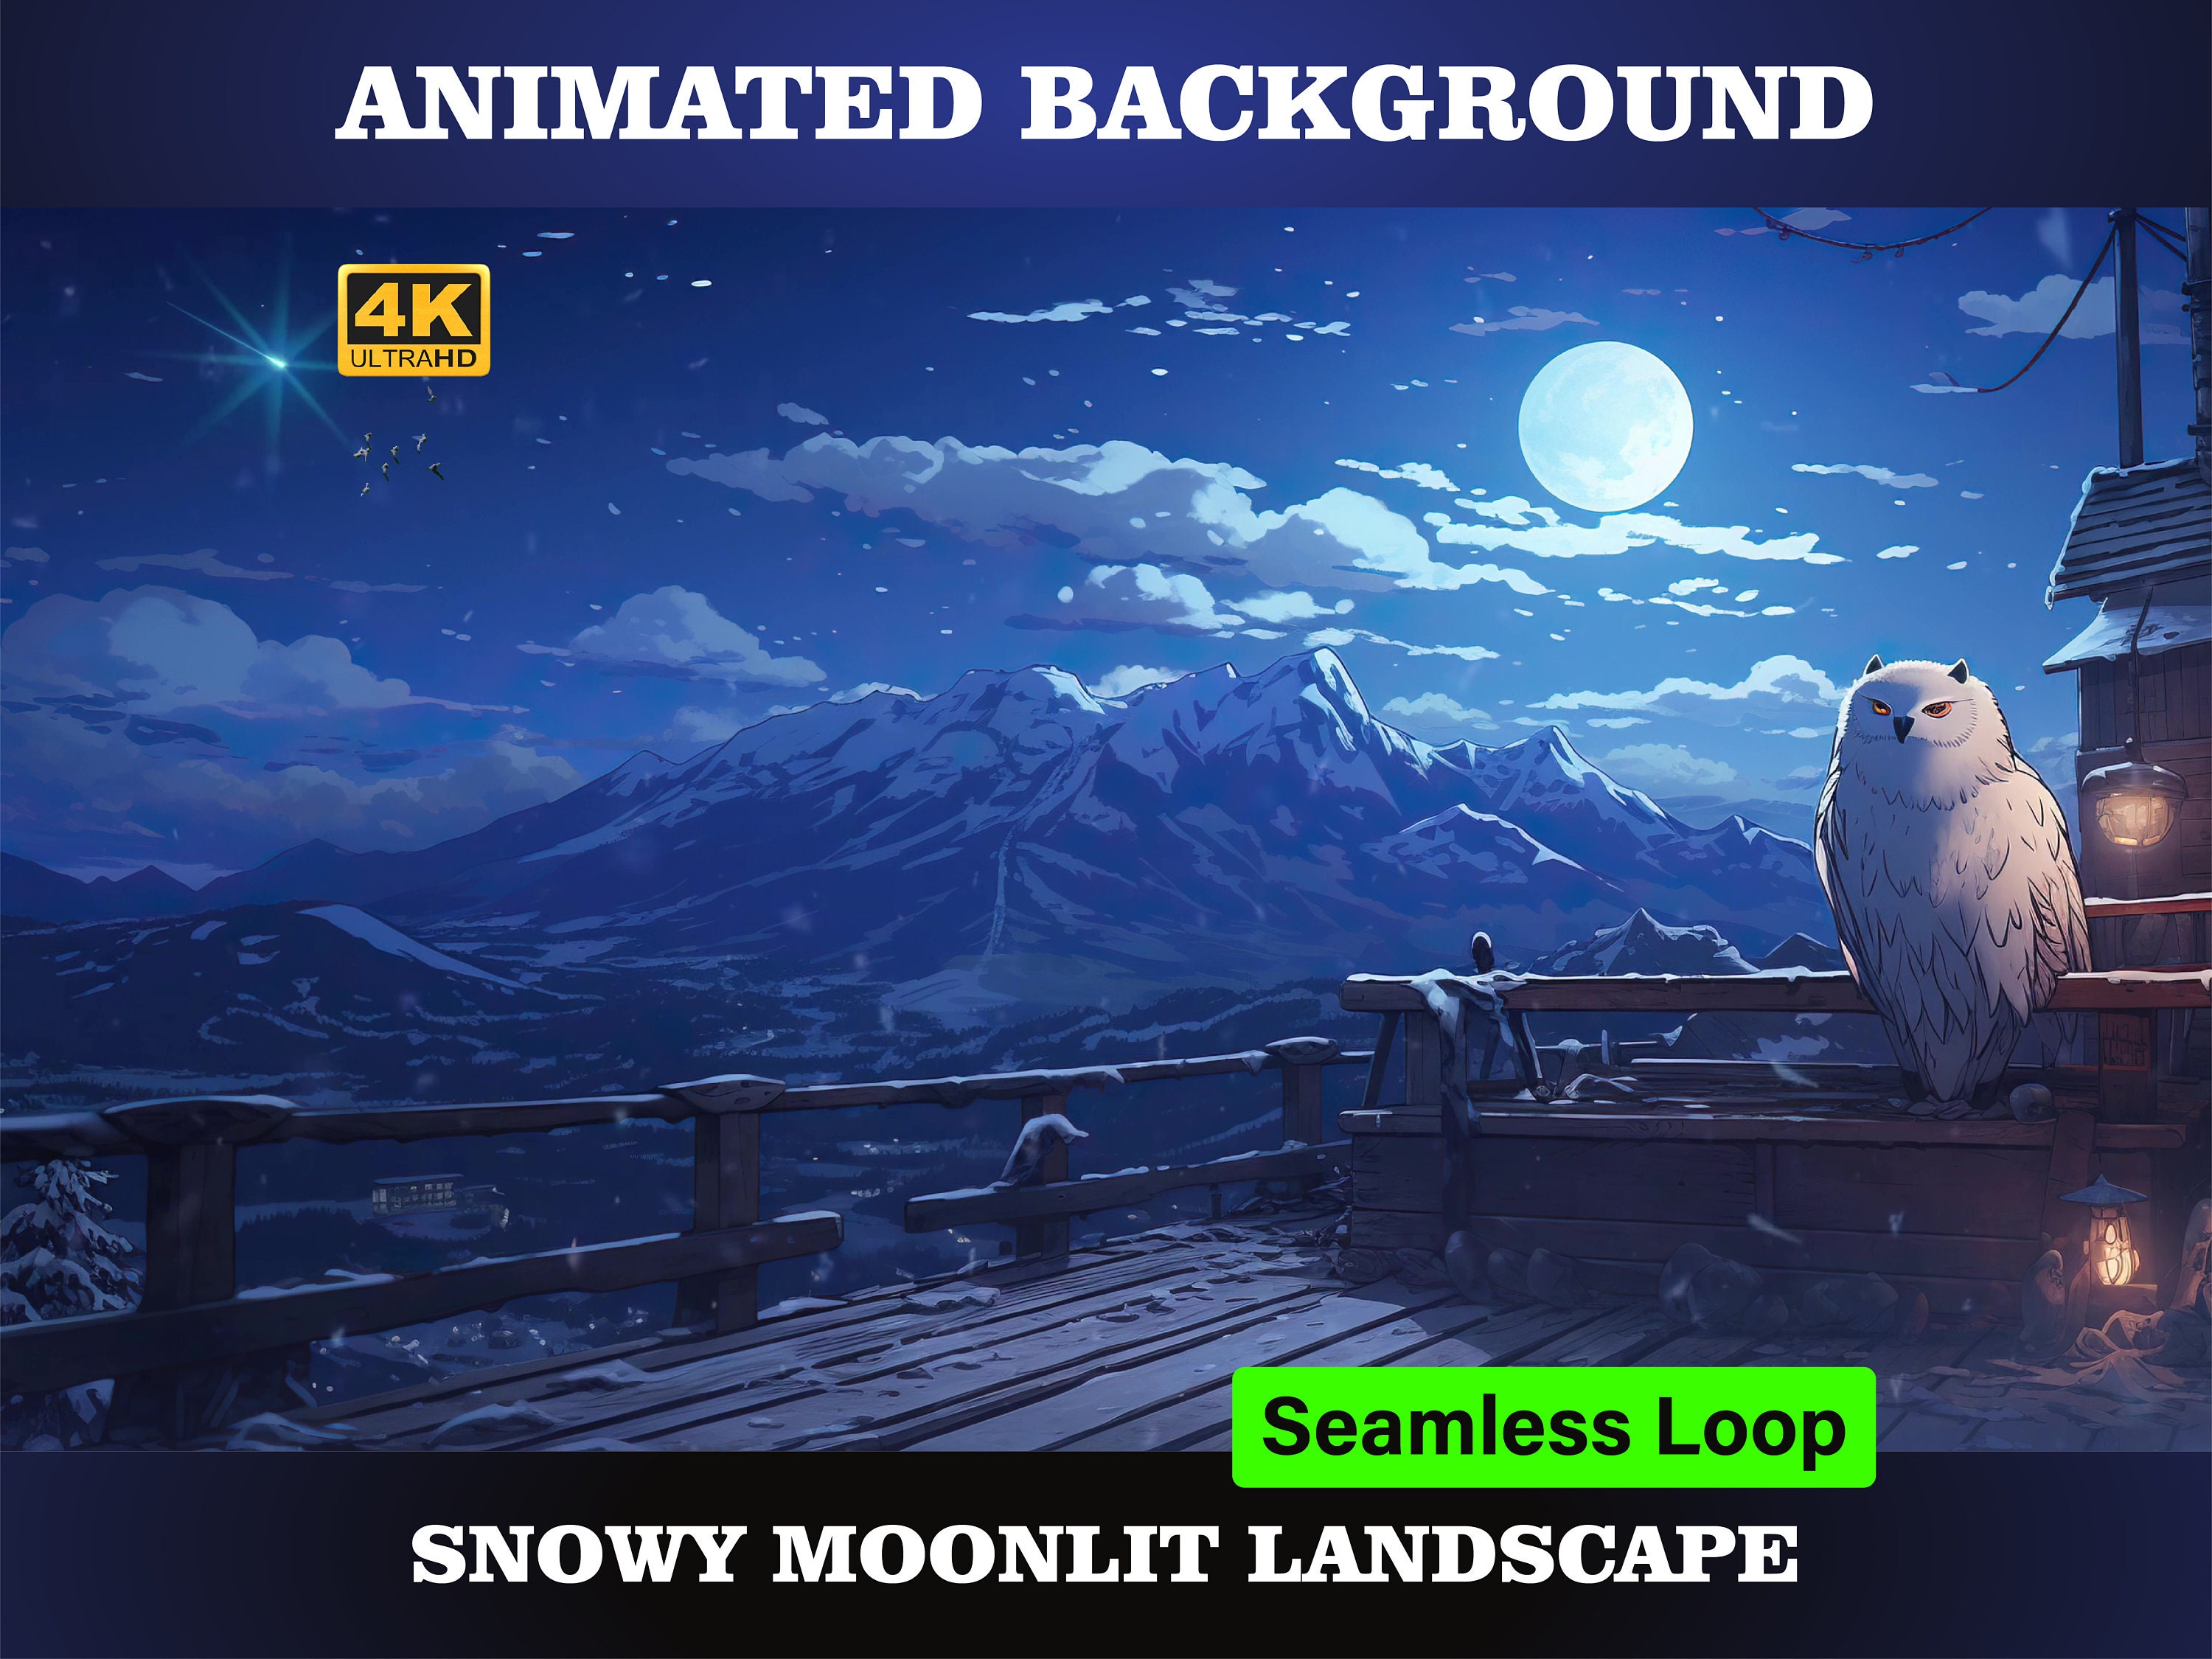 ANIMATED BACKGROUND | Night Scene: Snowy Owls with Twinkling Stars in Indigo Sky. 4K Animated Loopin